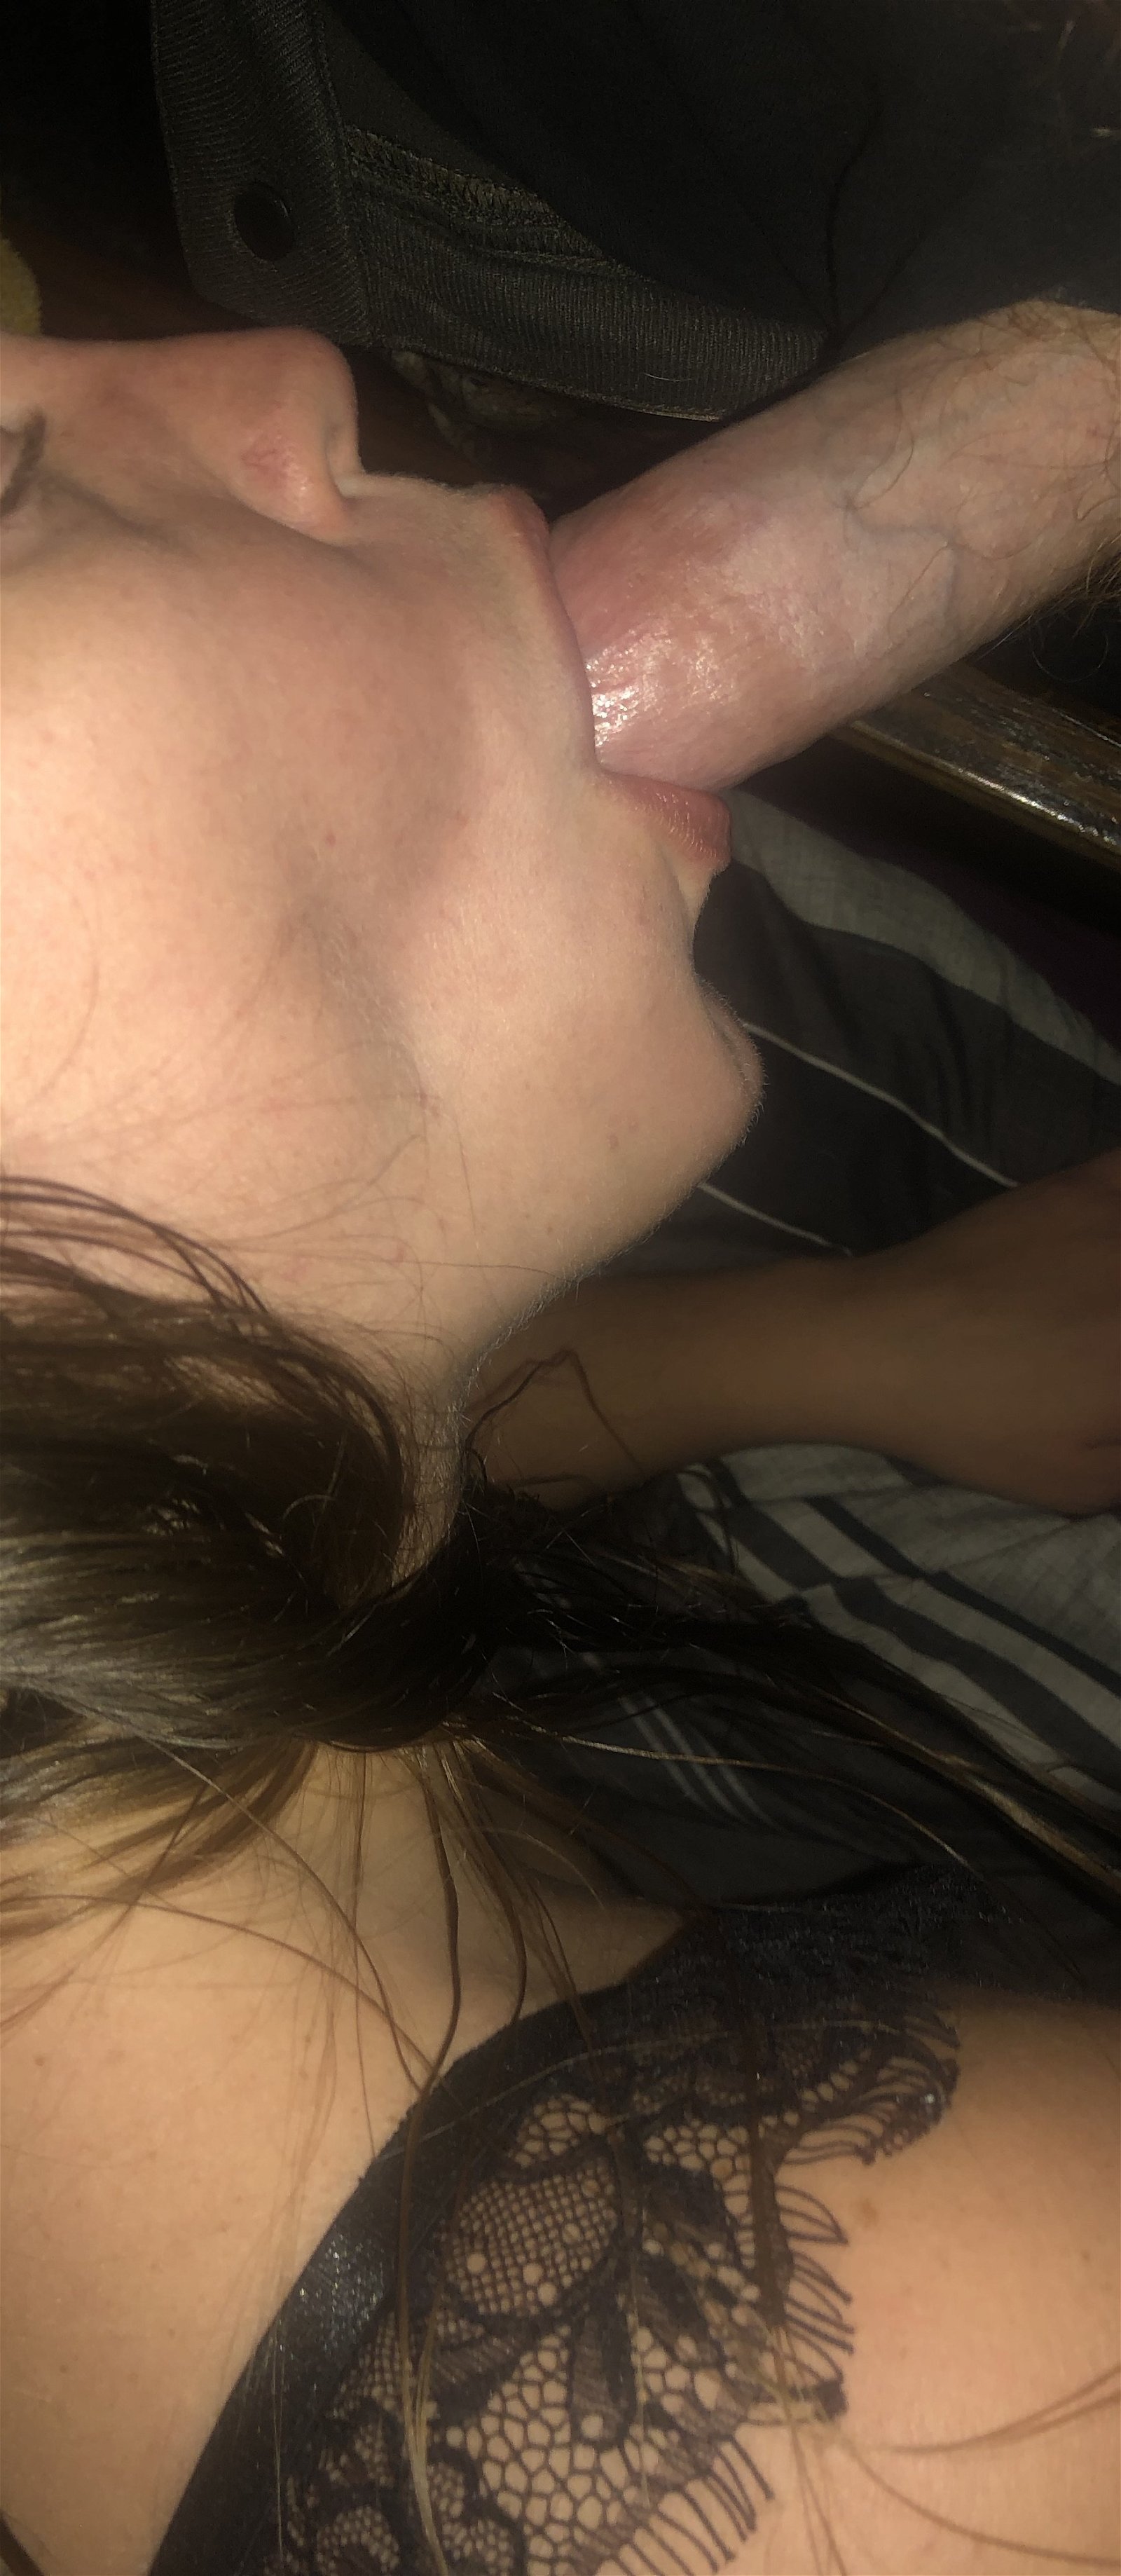 Watch the Photo by Shifty1588 with the username @Shifty1588, posted on November 8, 2019. The post is about the topic Amateurs. and the text says 'anyone in va wanna come fuck her hot pussy while she sucks my throbbing cock?!'